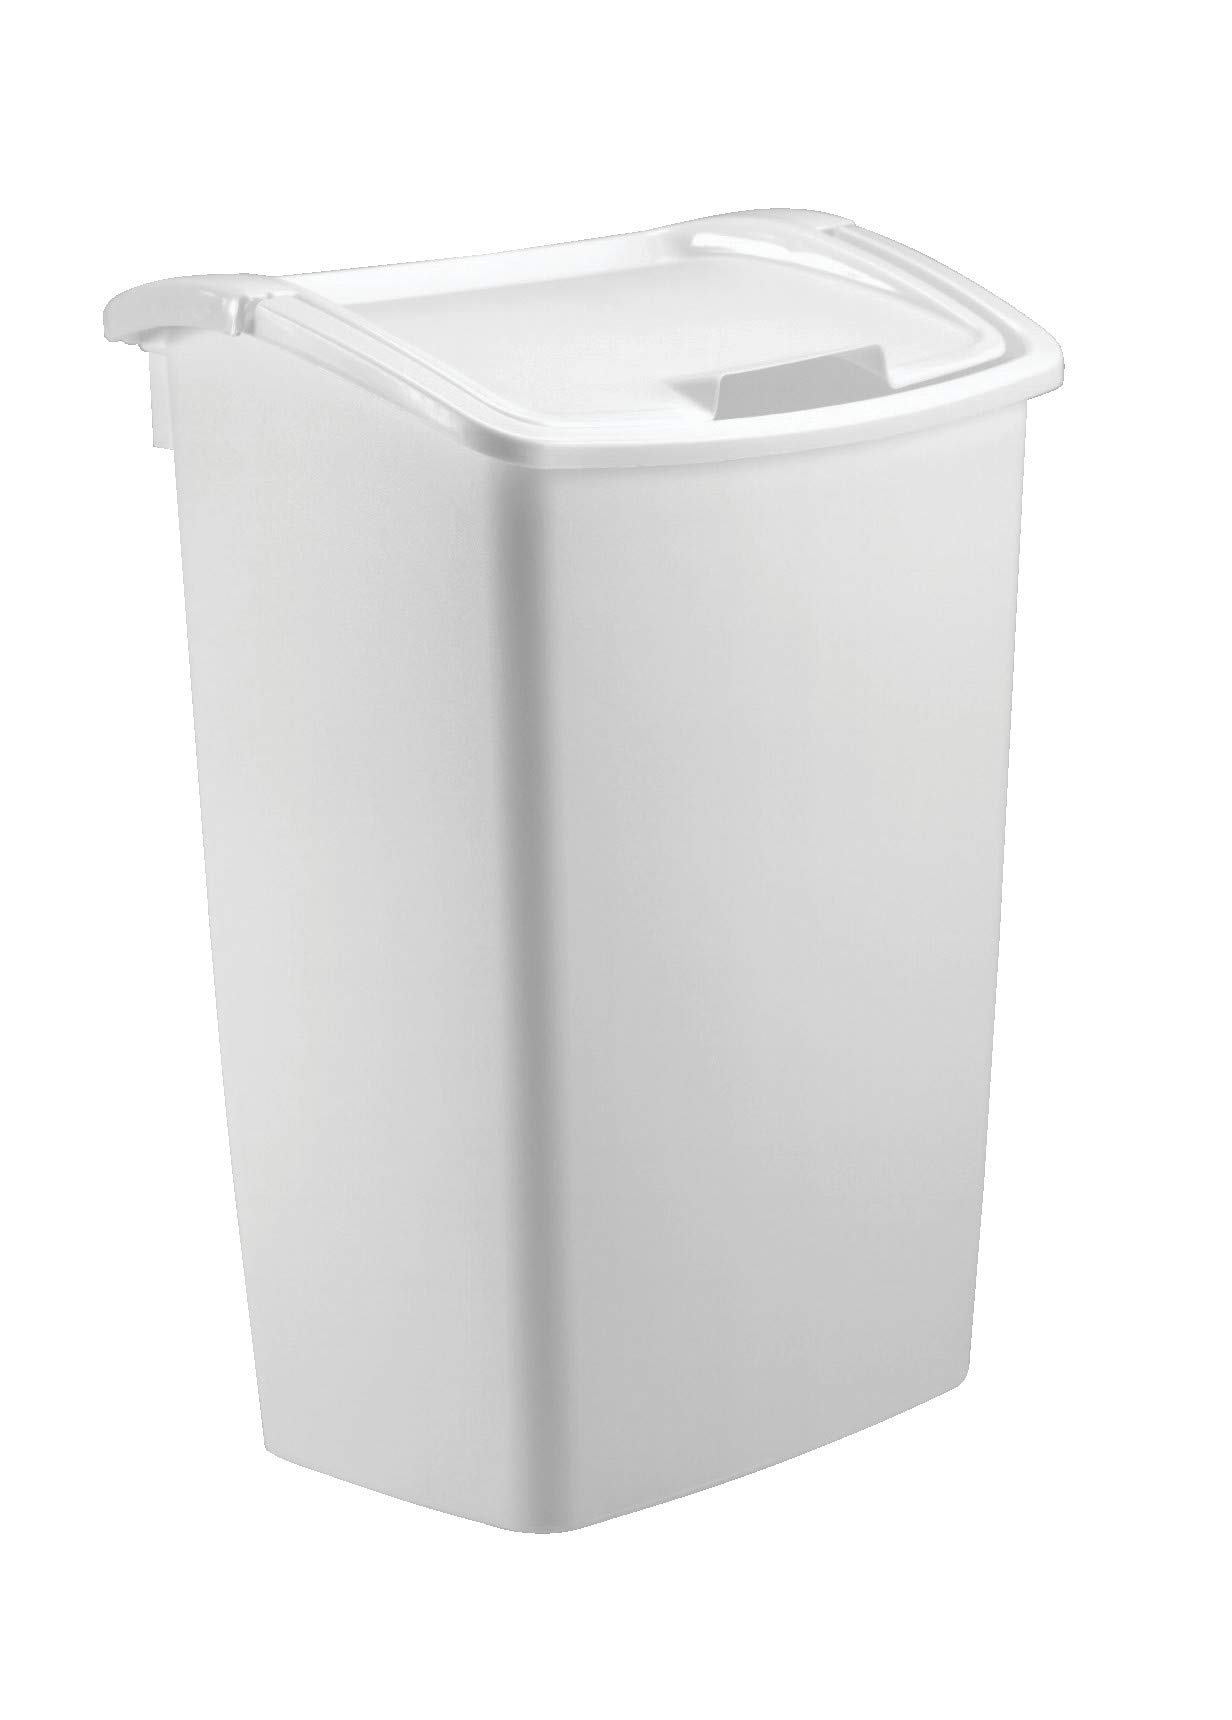 Book Cover Rubbermaid, 11.25 Gallon, White Dual-Action Swing Lid Trash Can for Home, Kitchen, and Bathroom Garbage